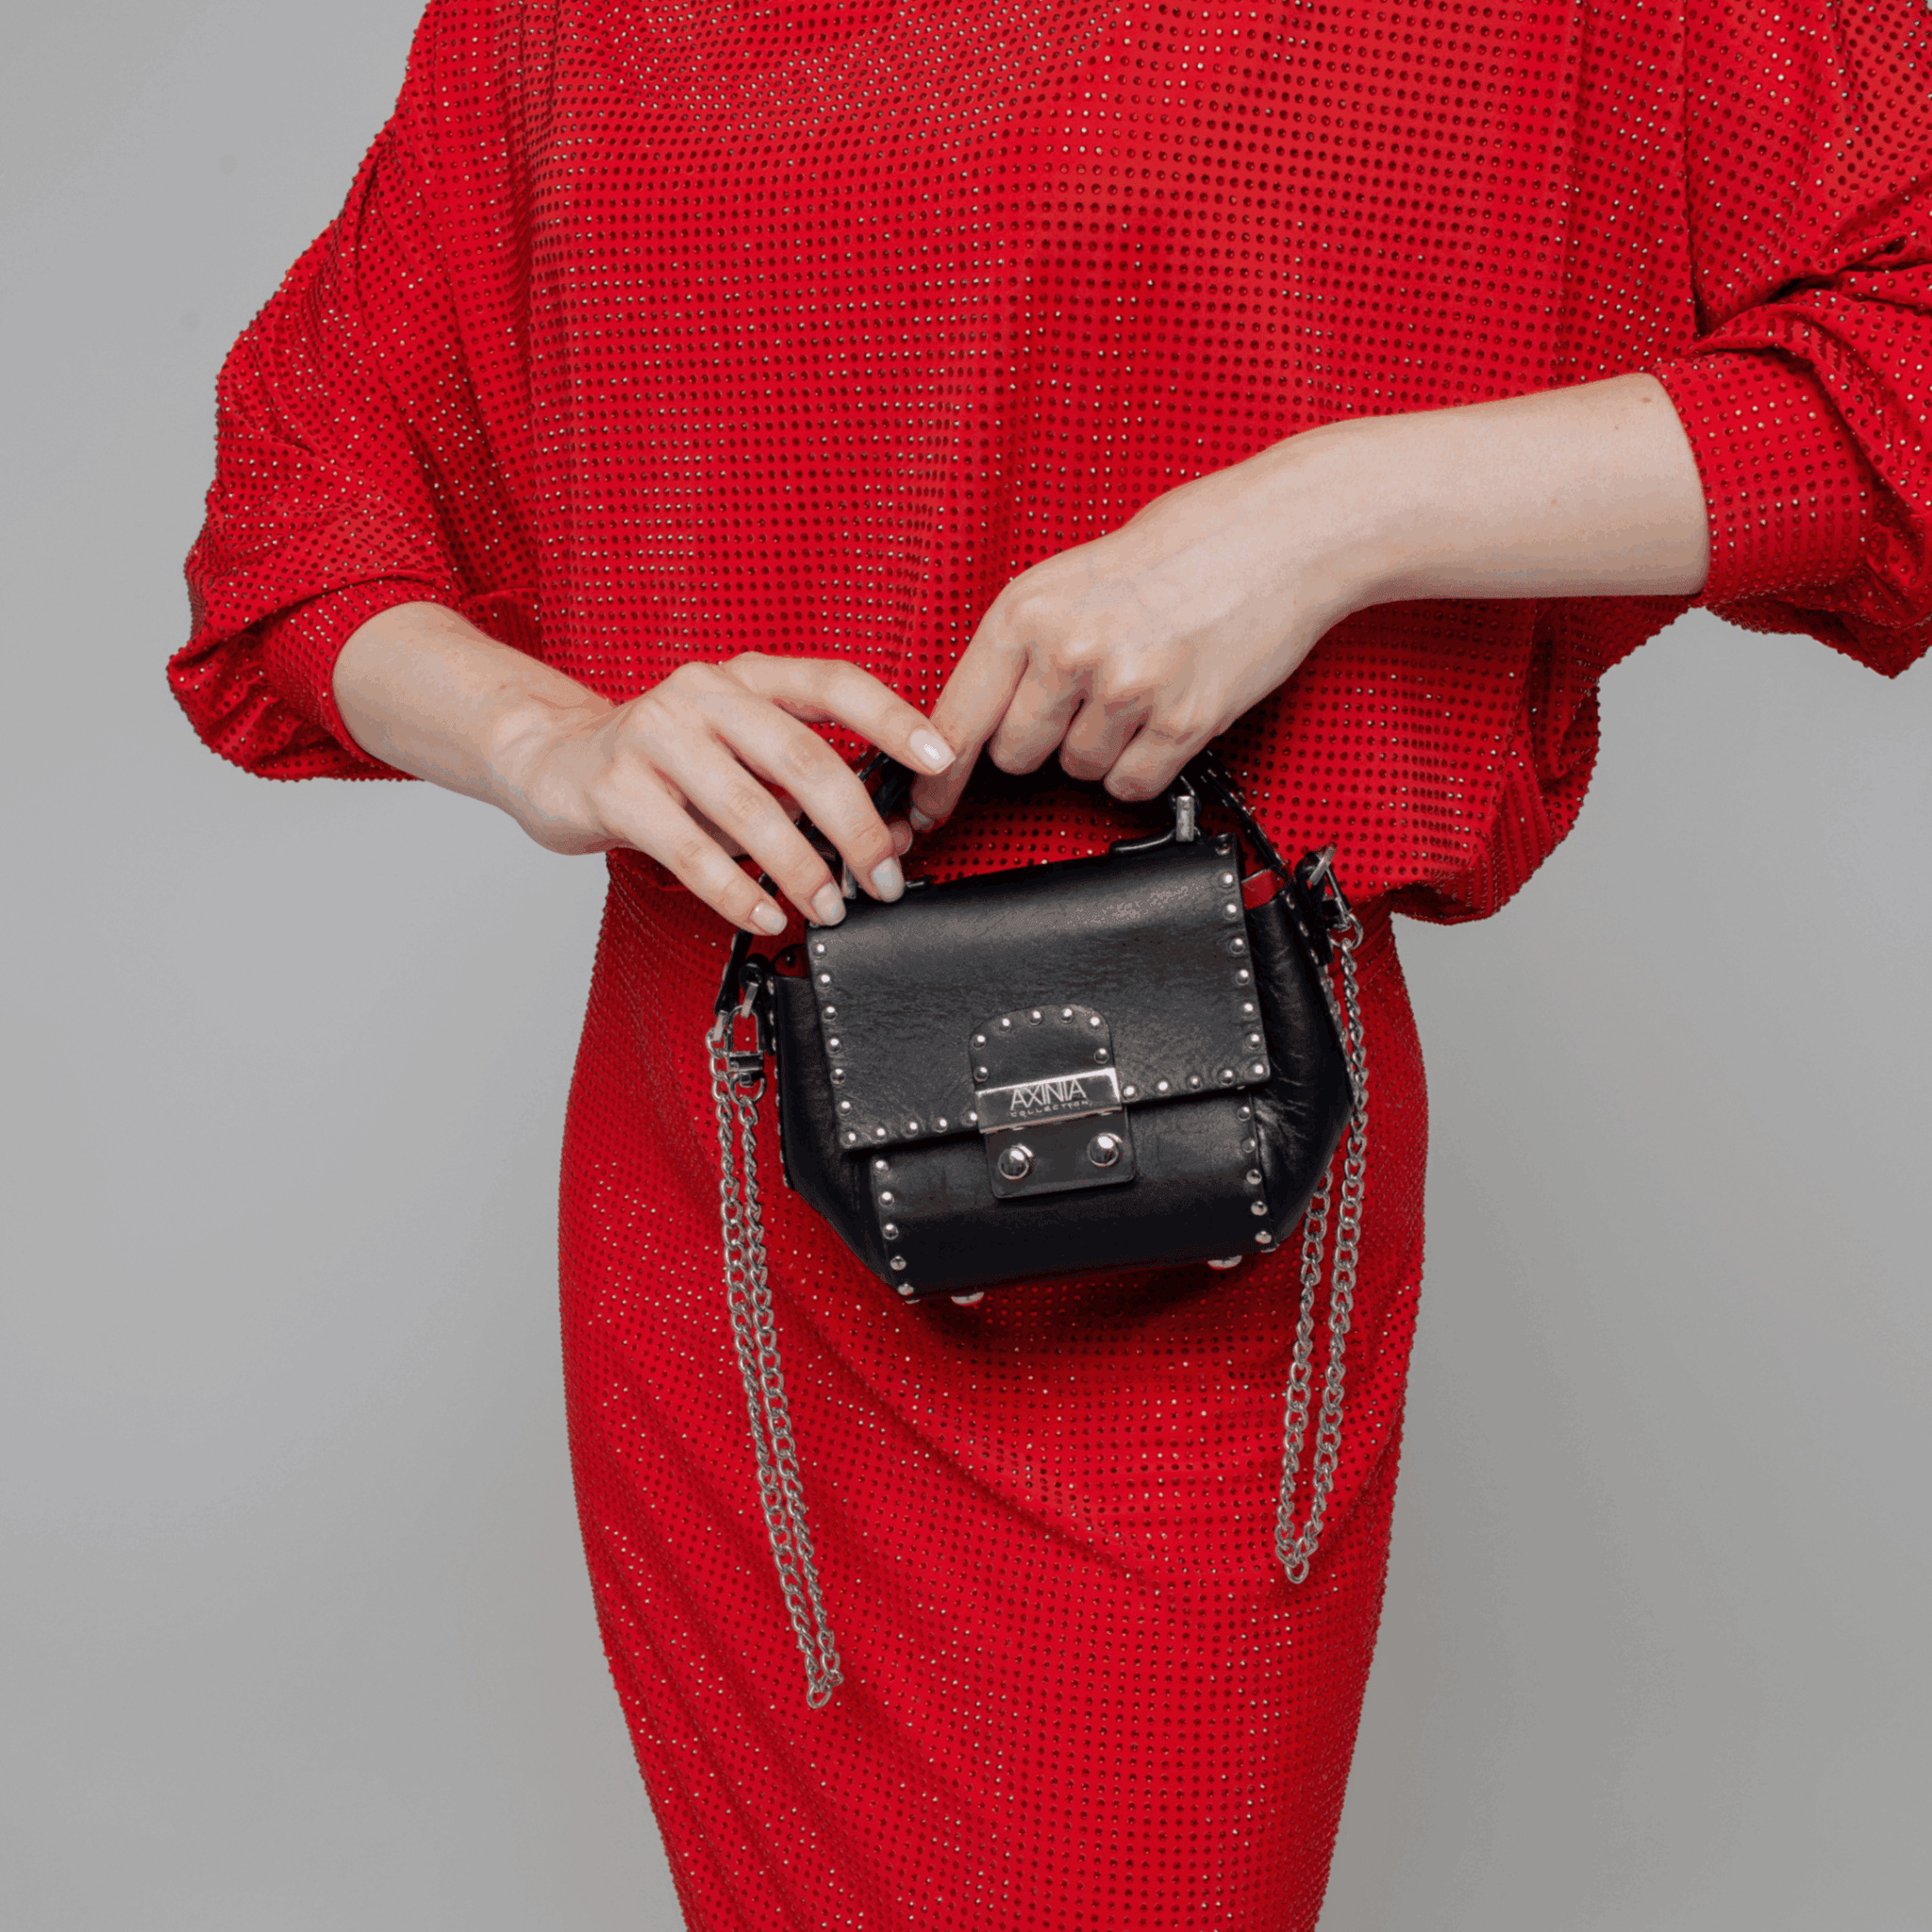 Exquisite detail of Mini Bag Riveted showcasing the fine craftsmanship and elegant design characteristic of Axinia Collection 's luxury collection.